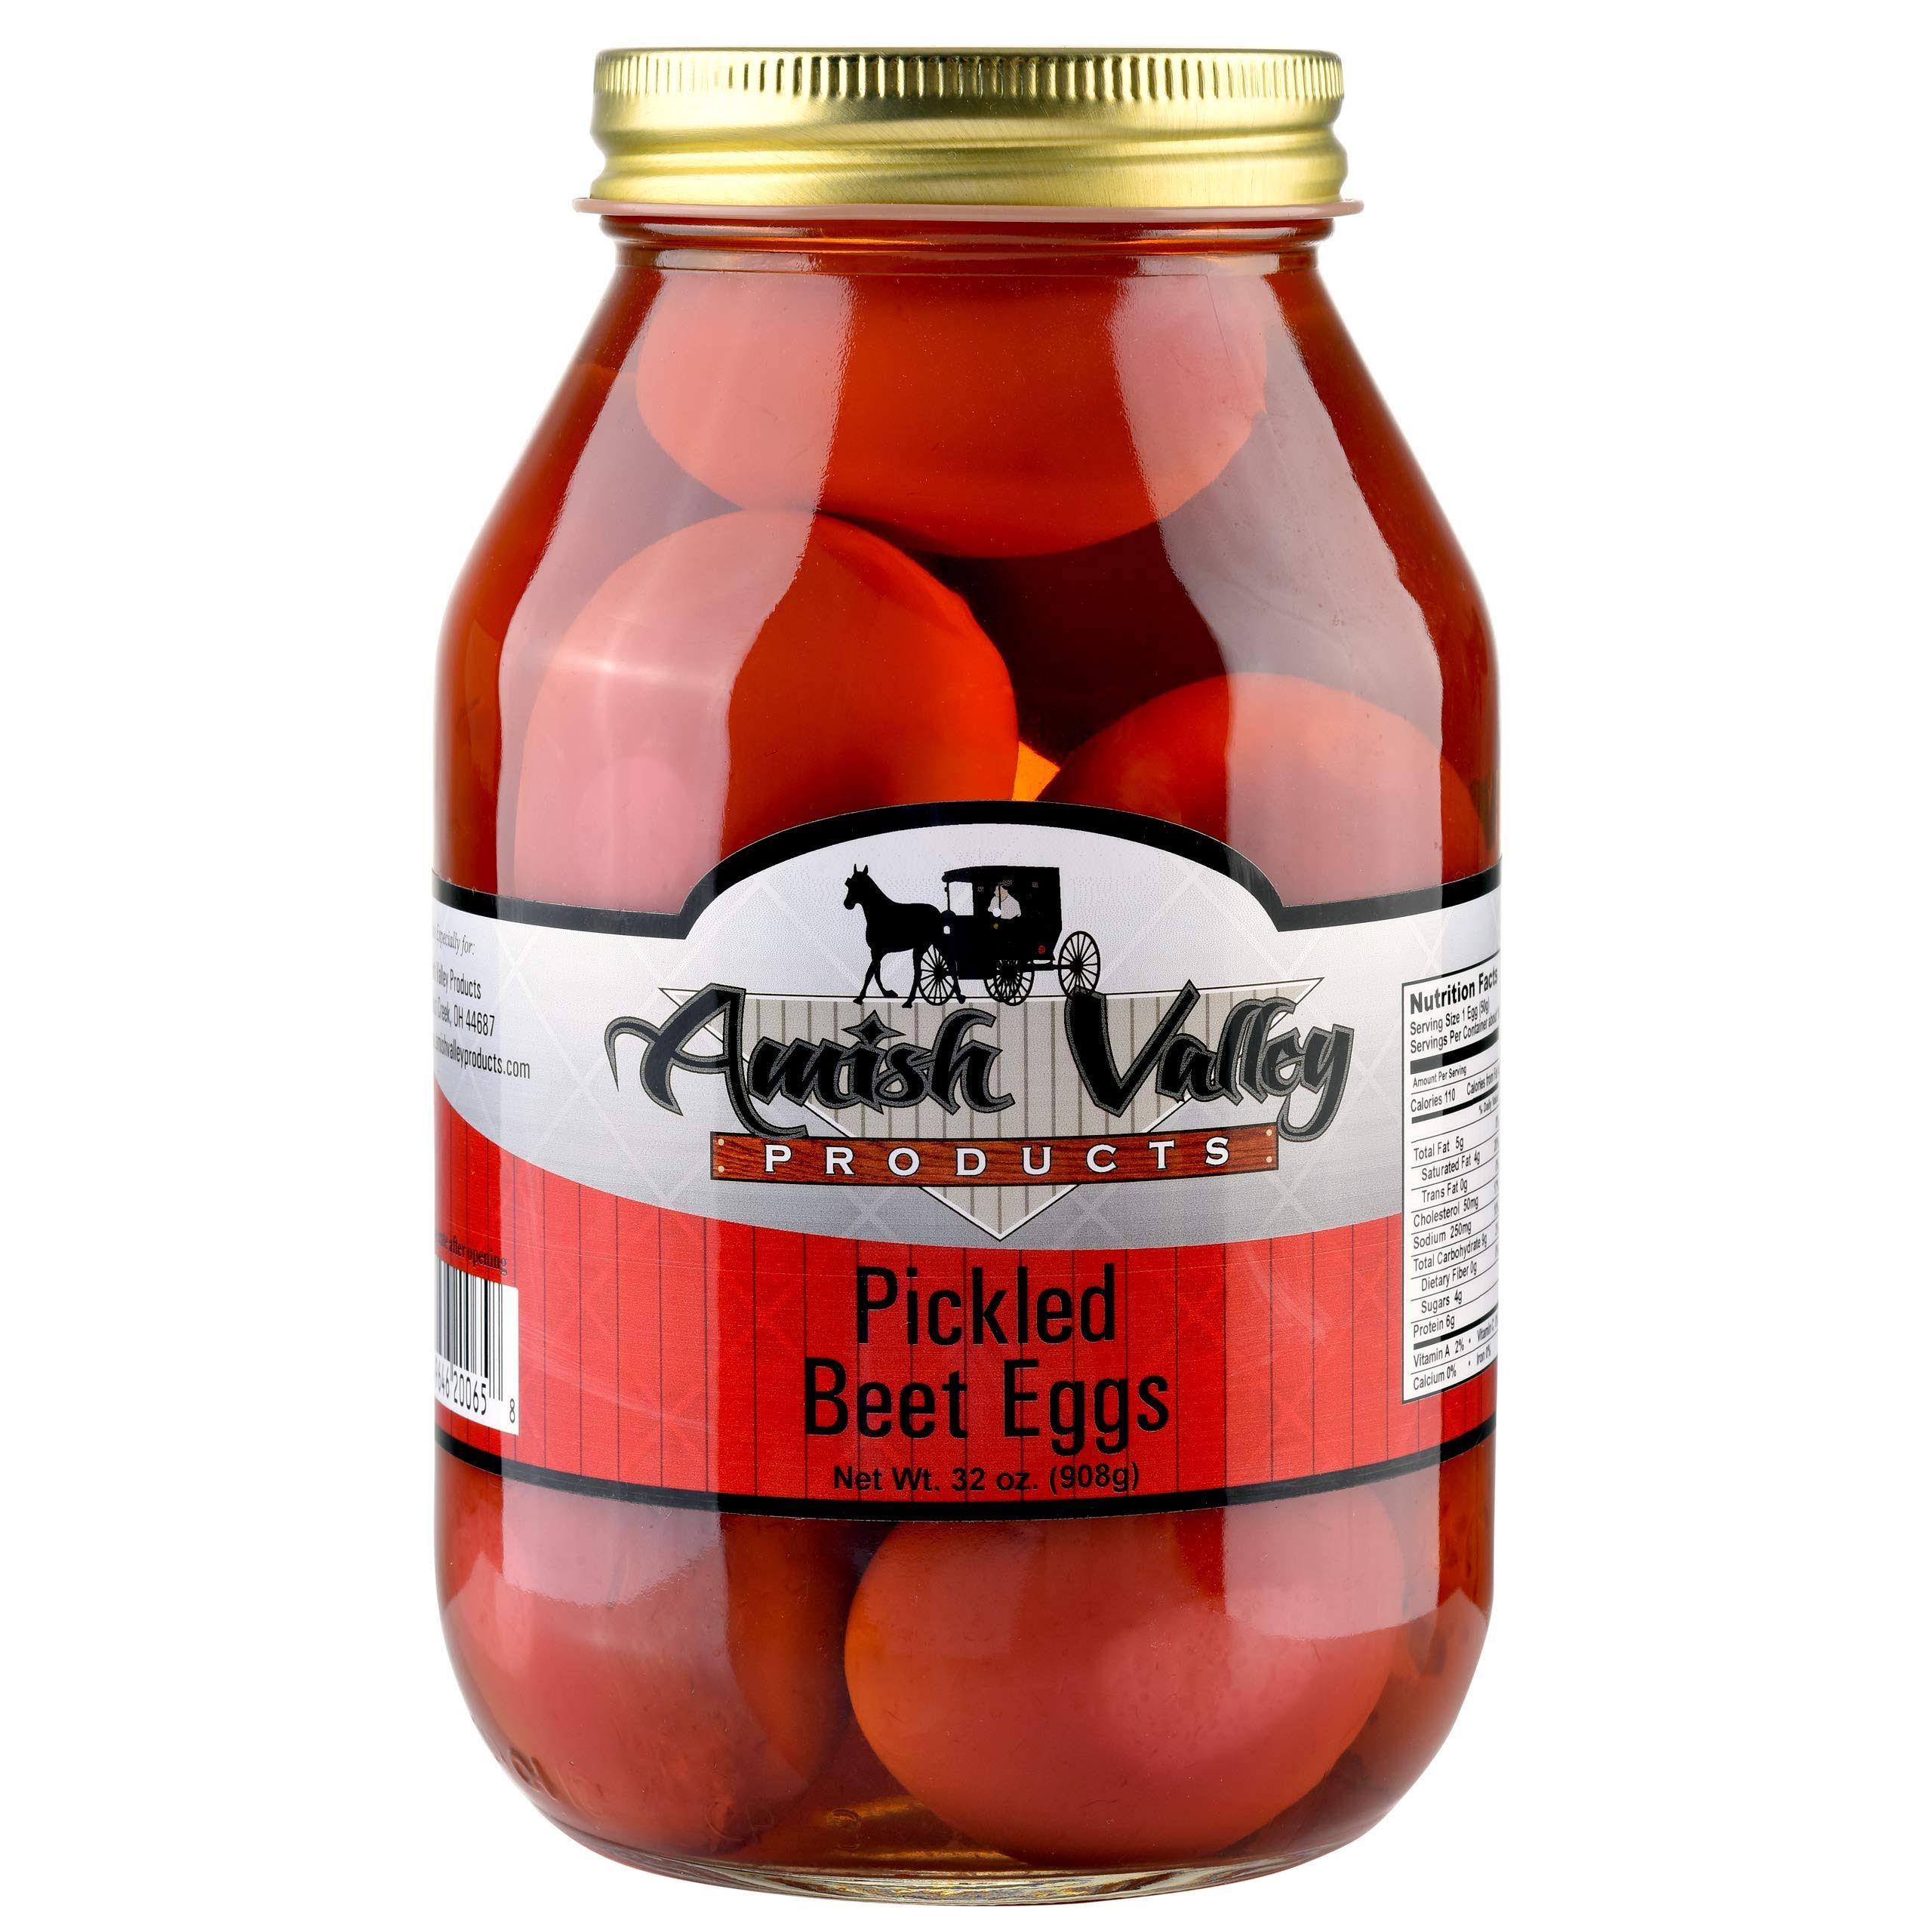 Amish Valley Products Pickled Eggs in Beet Juice Quart Glass Jar (1 Qu